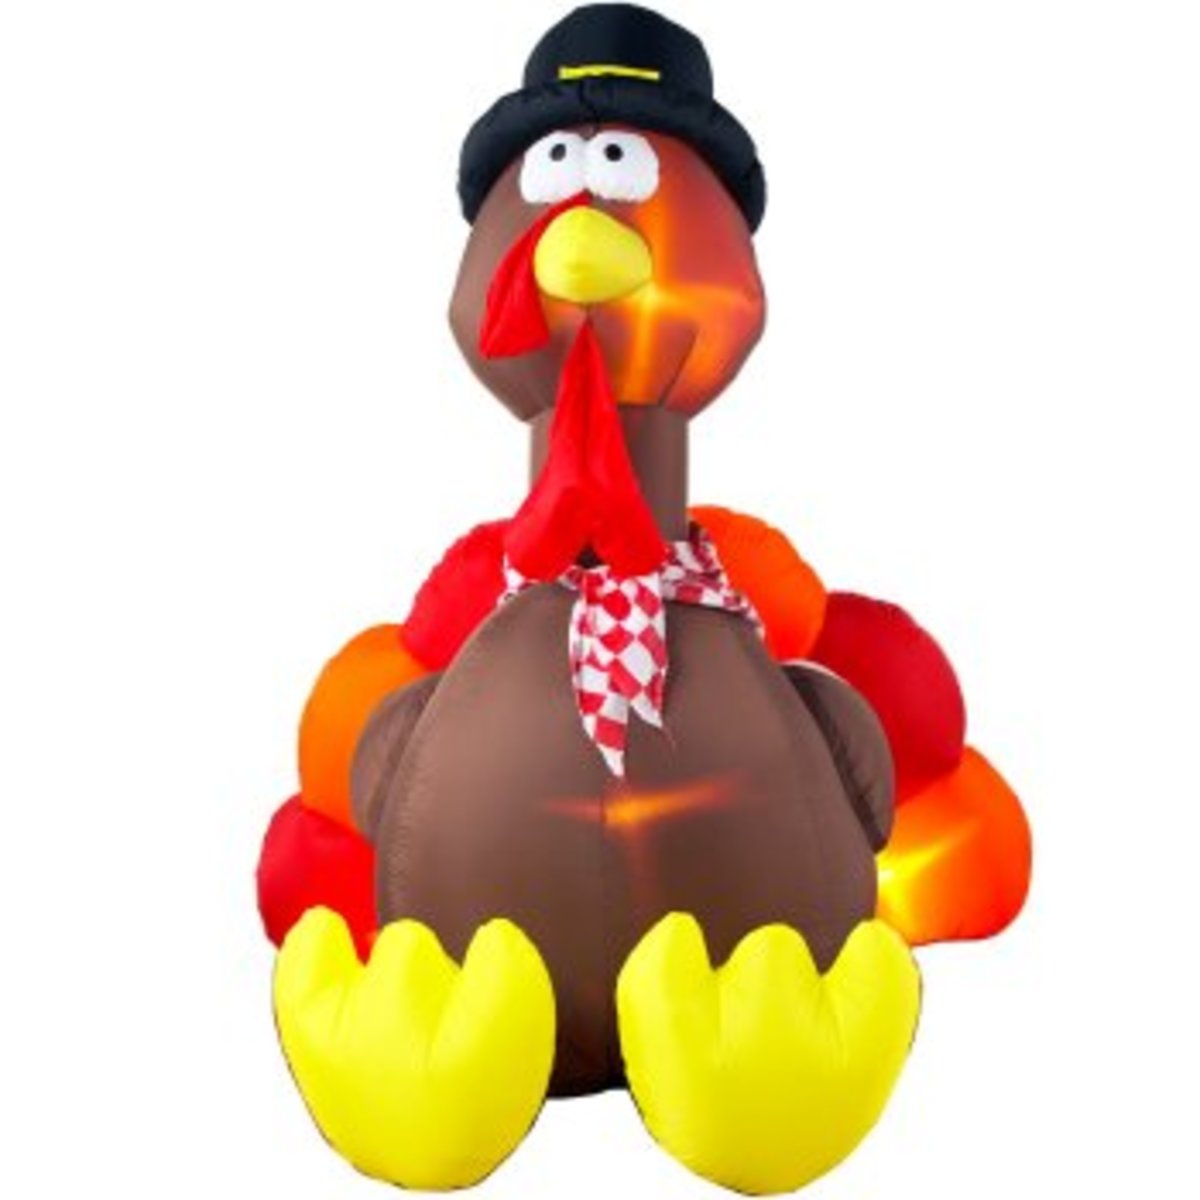 outdoor-inflatable-thanksgiving-yard-decorations